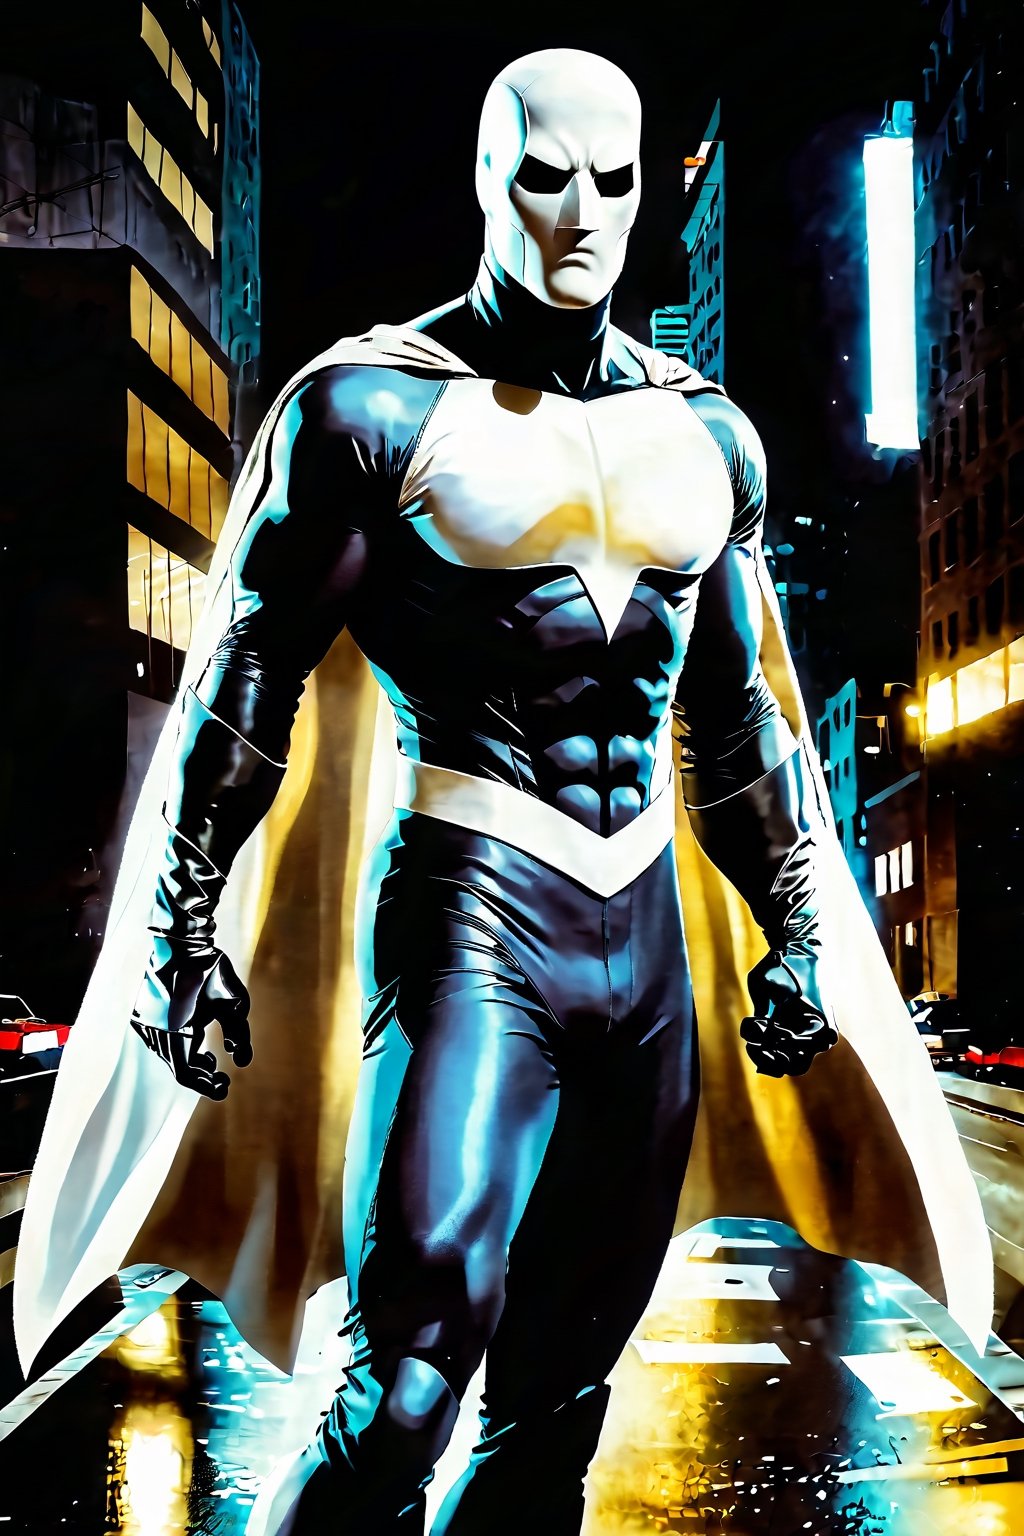 The Phantom, The Ghost Who Walks, first superhero, tight suit, athletic, mask, ,better photography